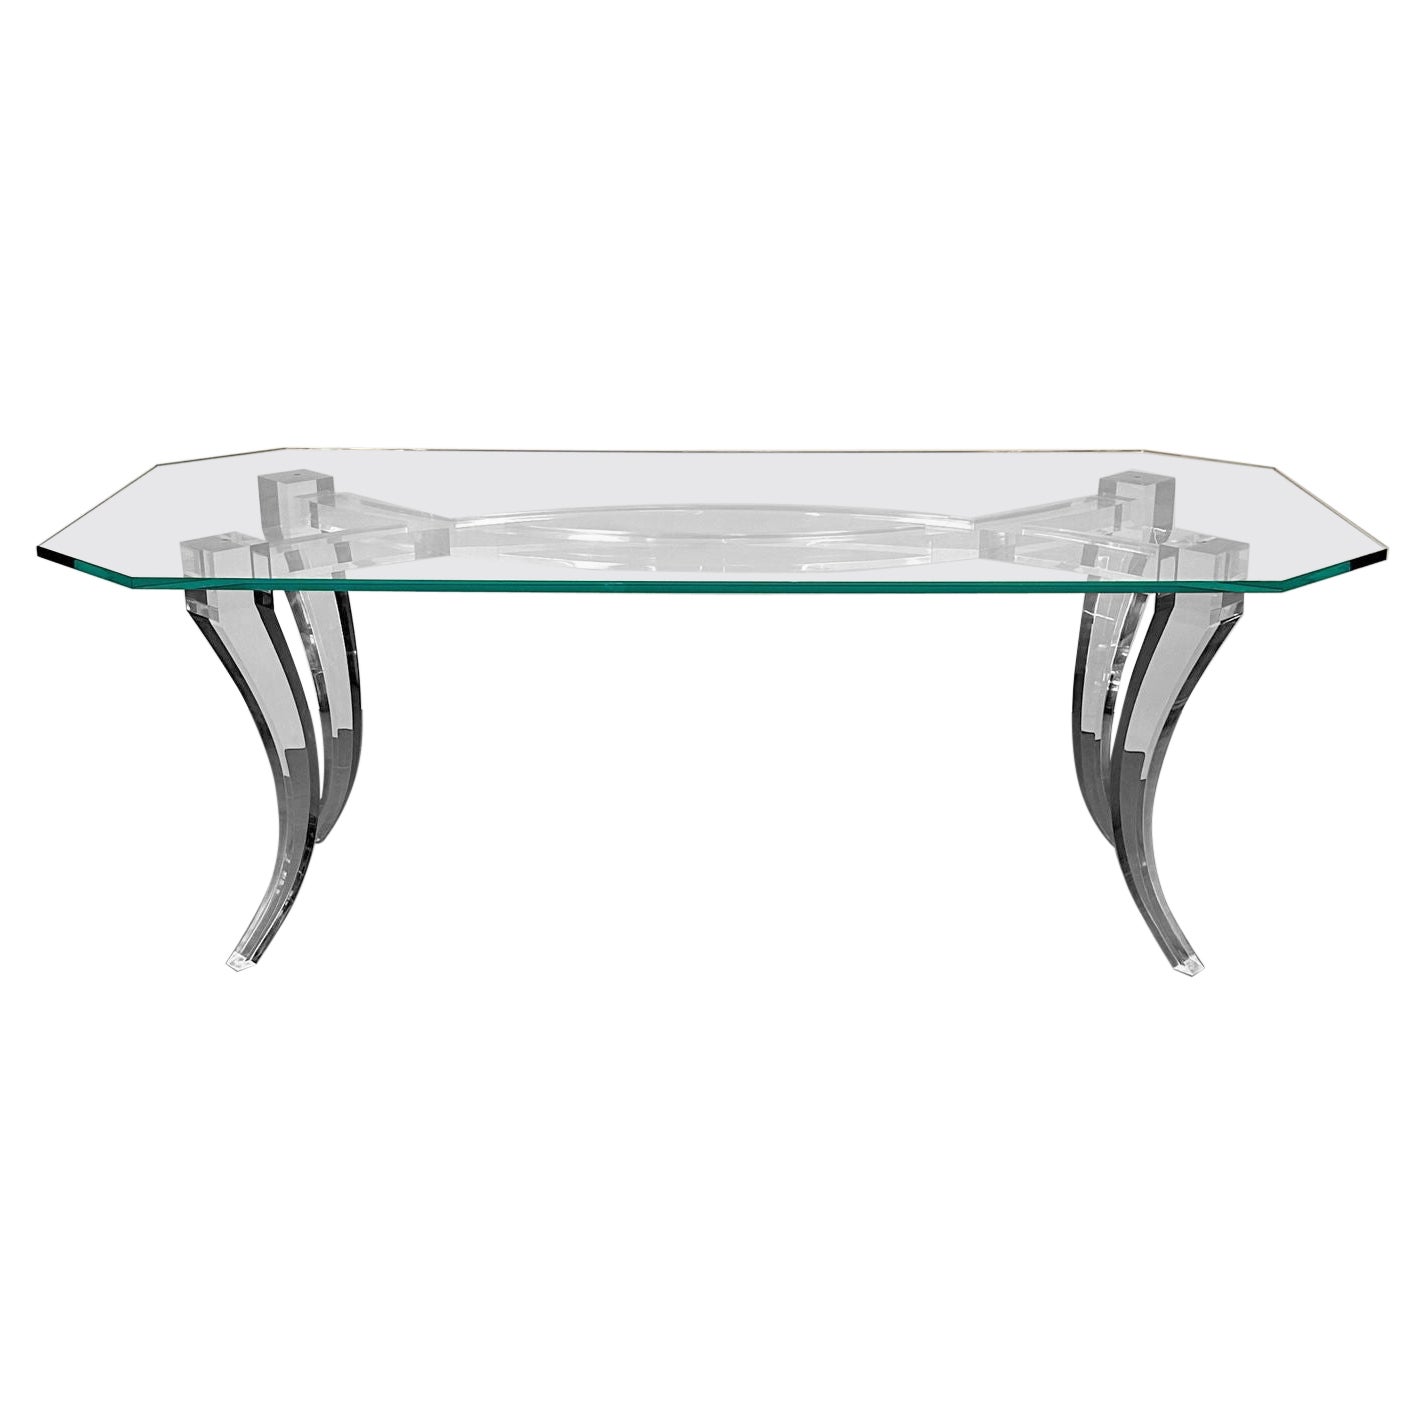 Modern Lucite and Glass Dining / Kitchen Table, American Designer, 2000s